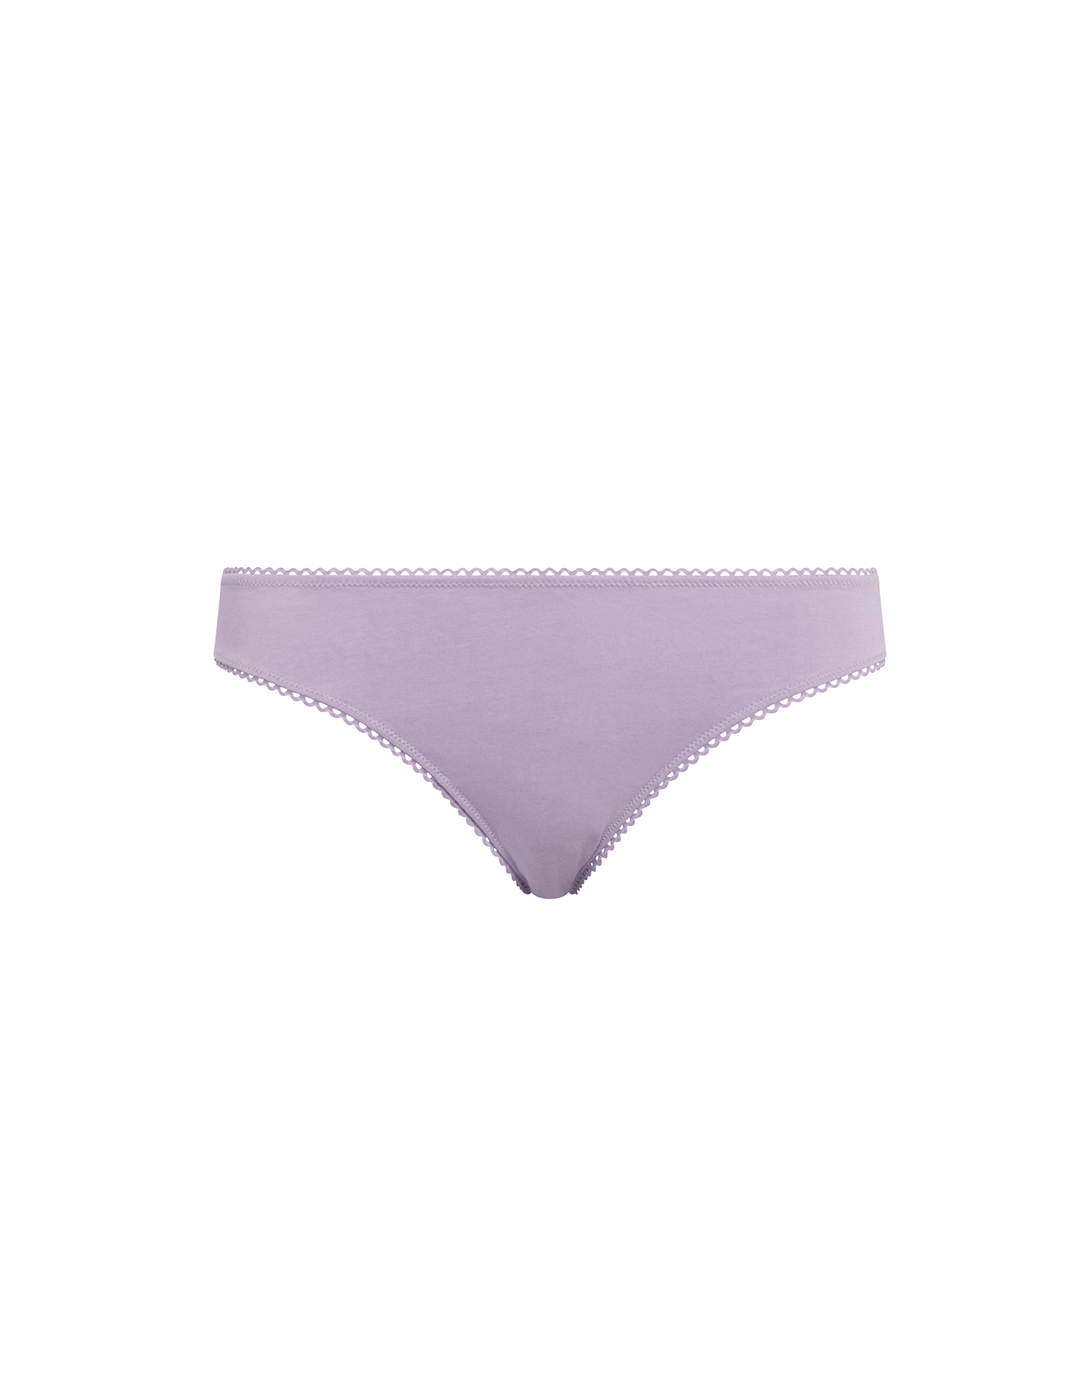 Hi guys! Kit Undergarments has joined forces with @thirdlove in